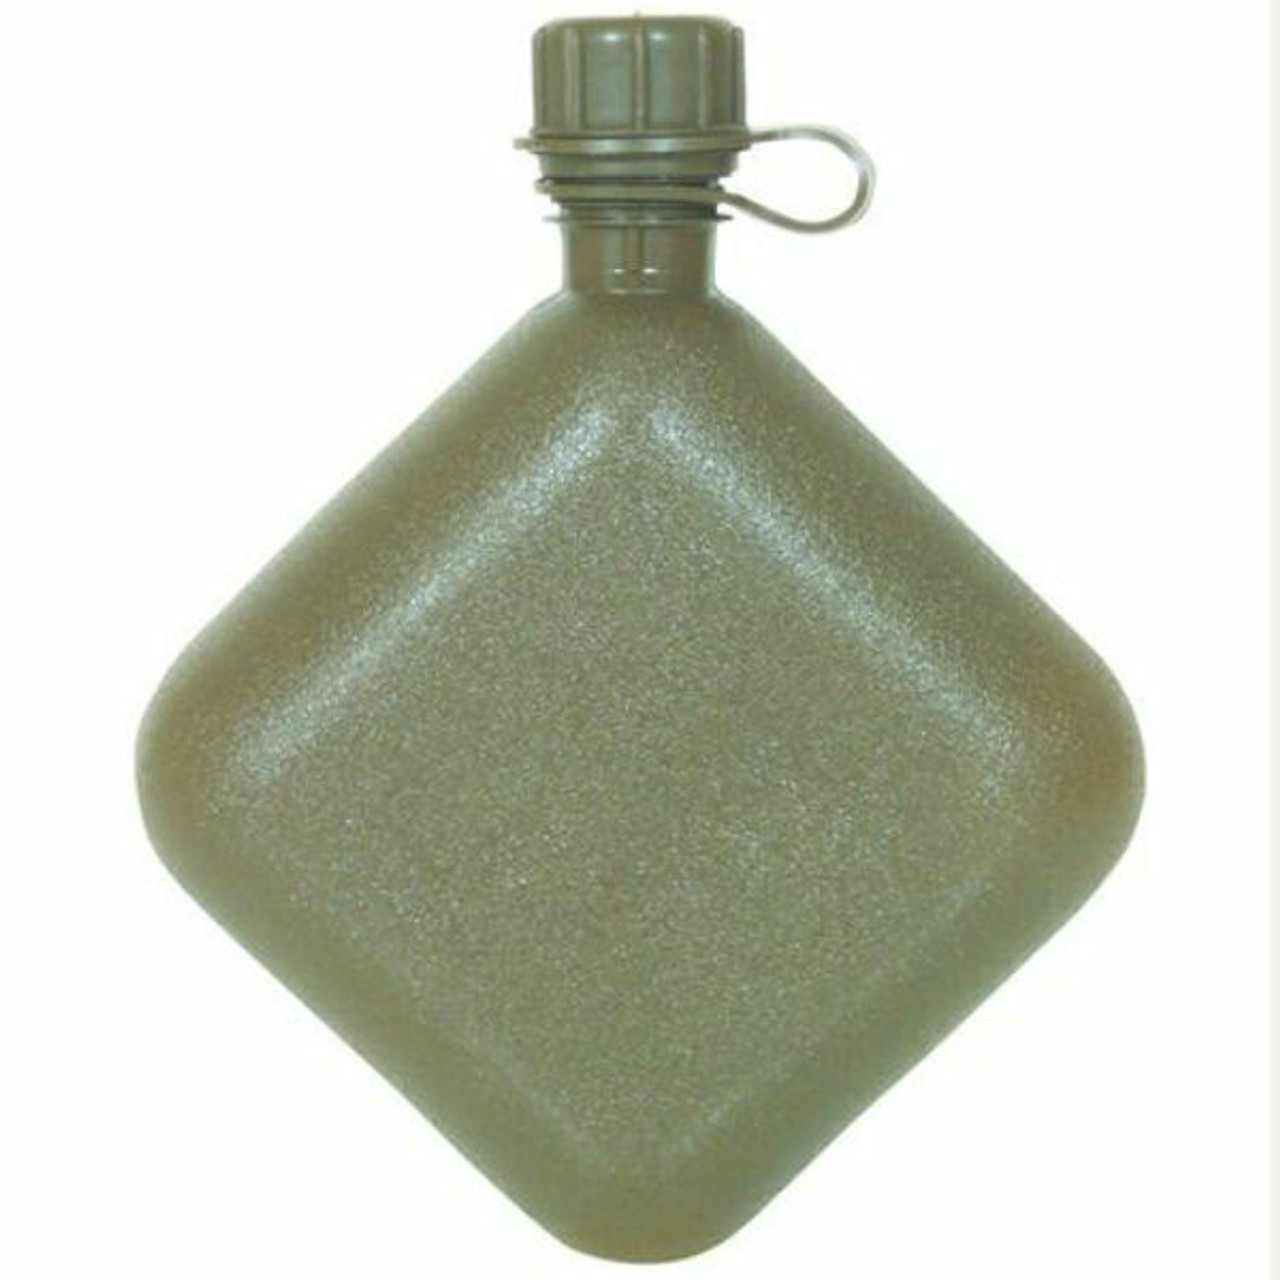 NEW US Military 2 Quart Collapsible Water Canteen 2 QT Bladder w M-1 Cap 